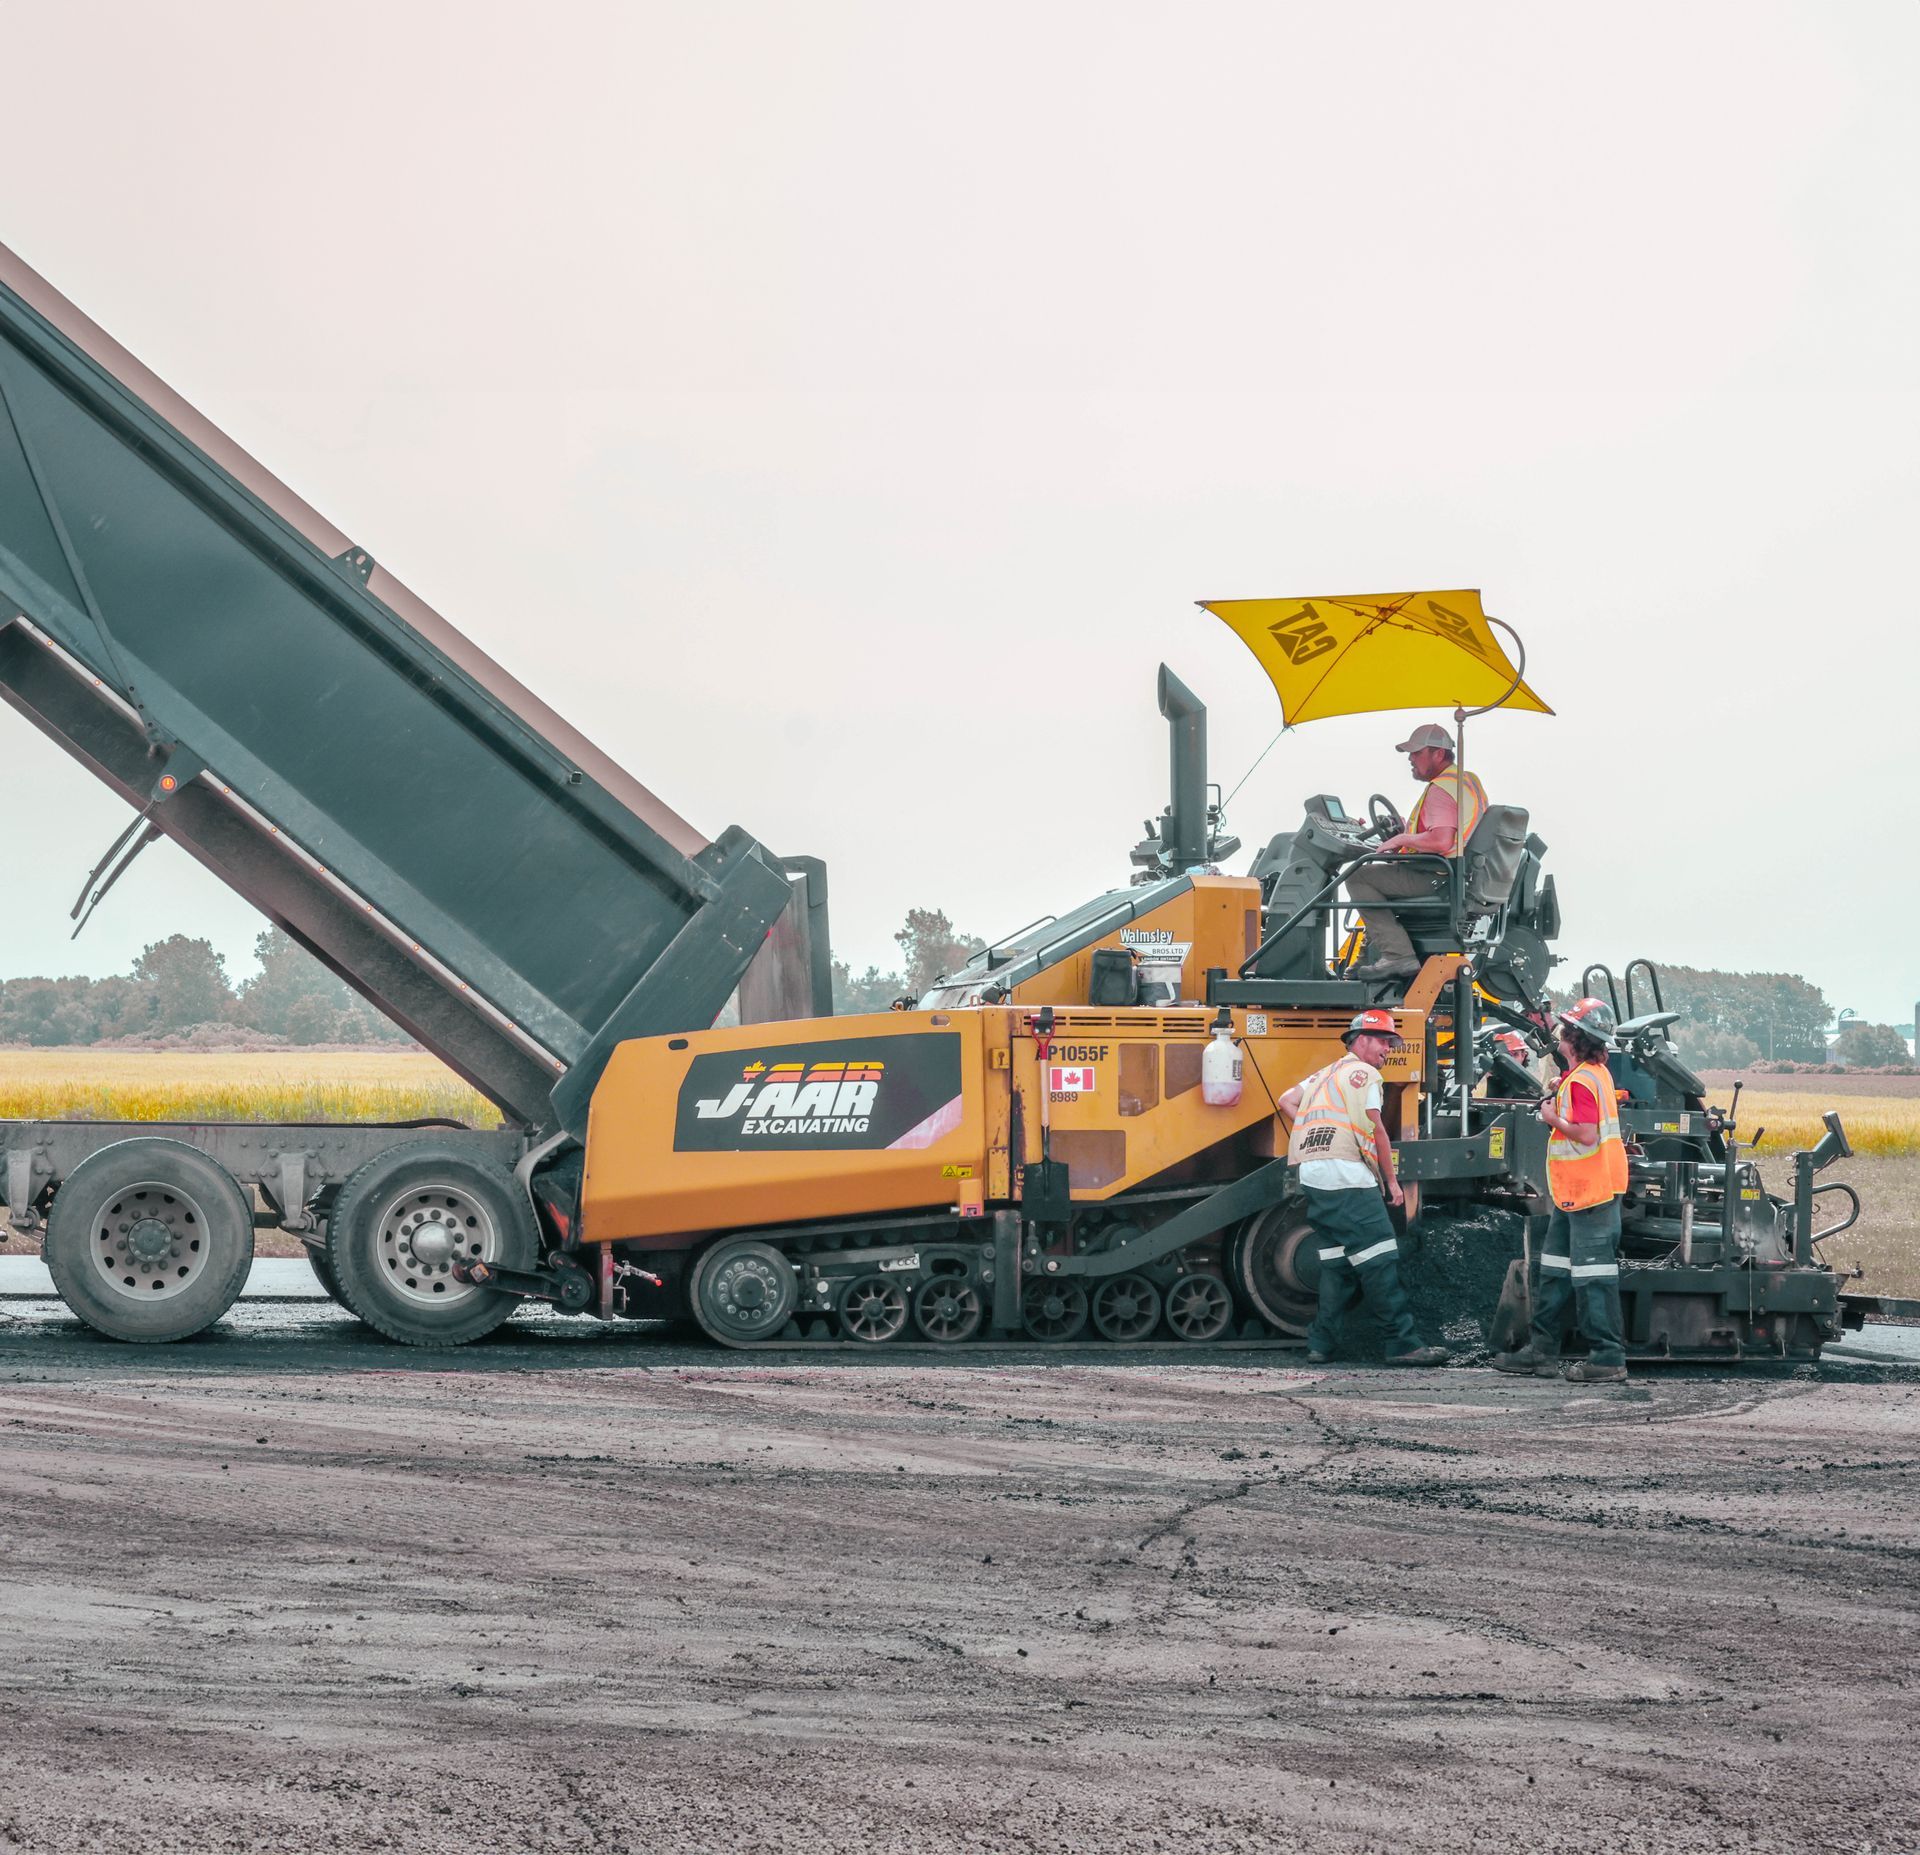 a yellow and black asphalt paver is being loaded onto a dump truck .